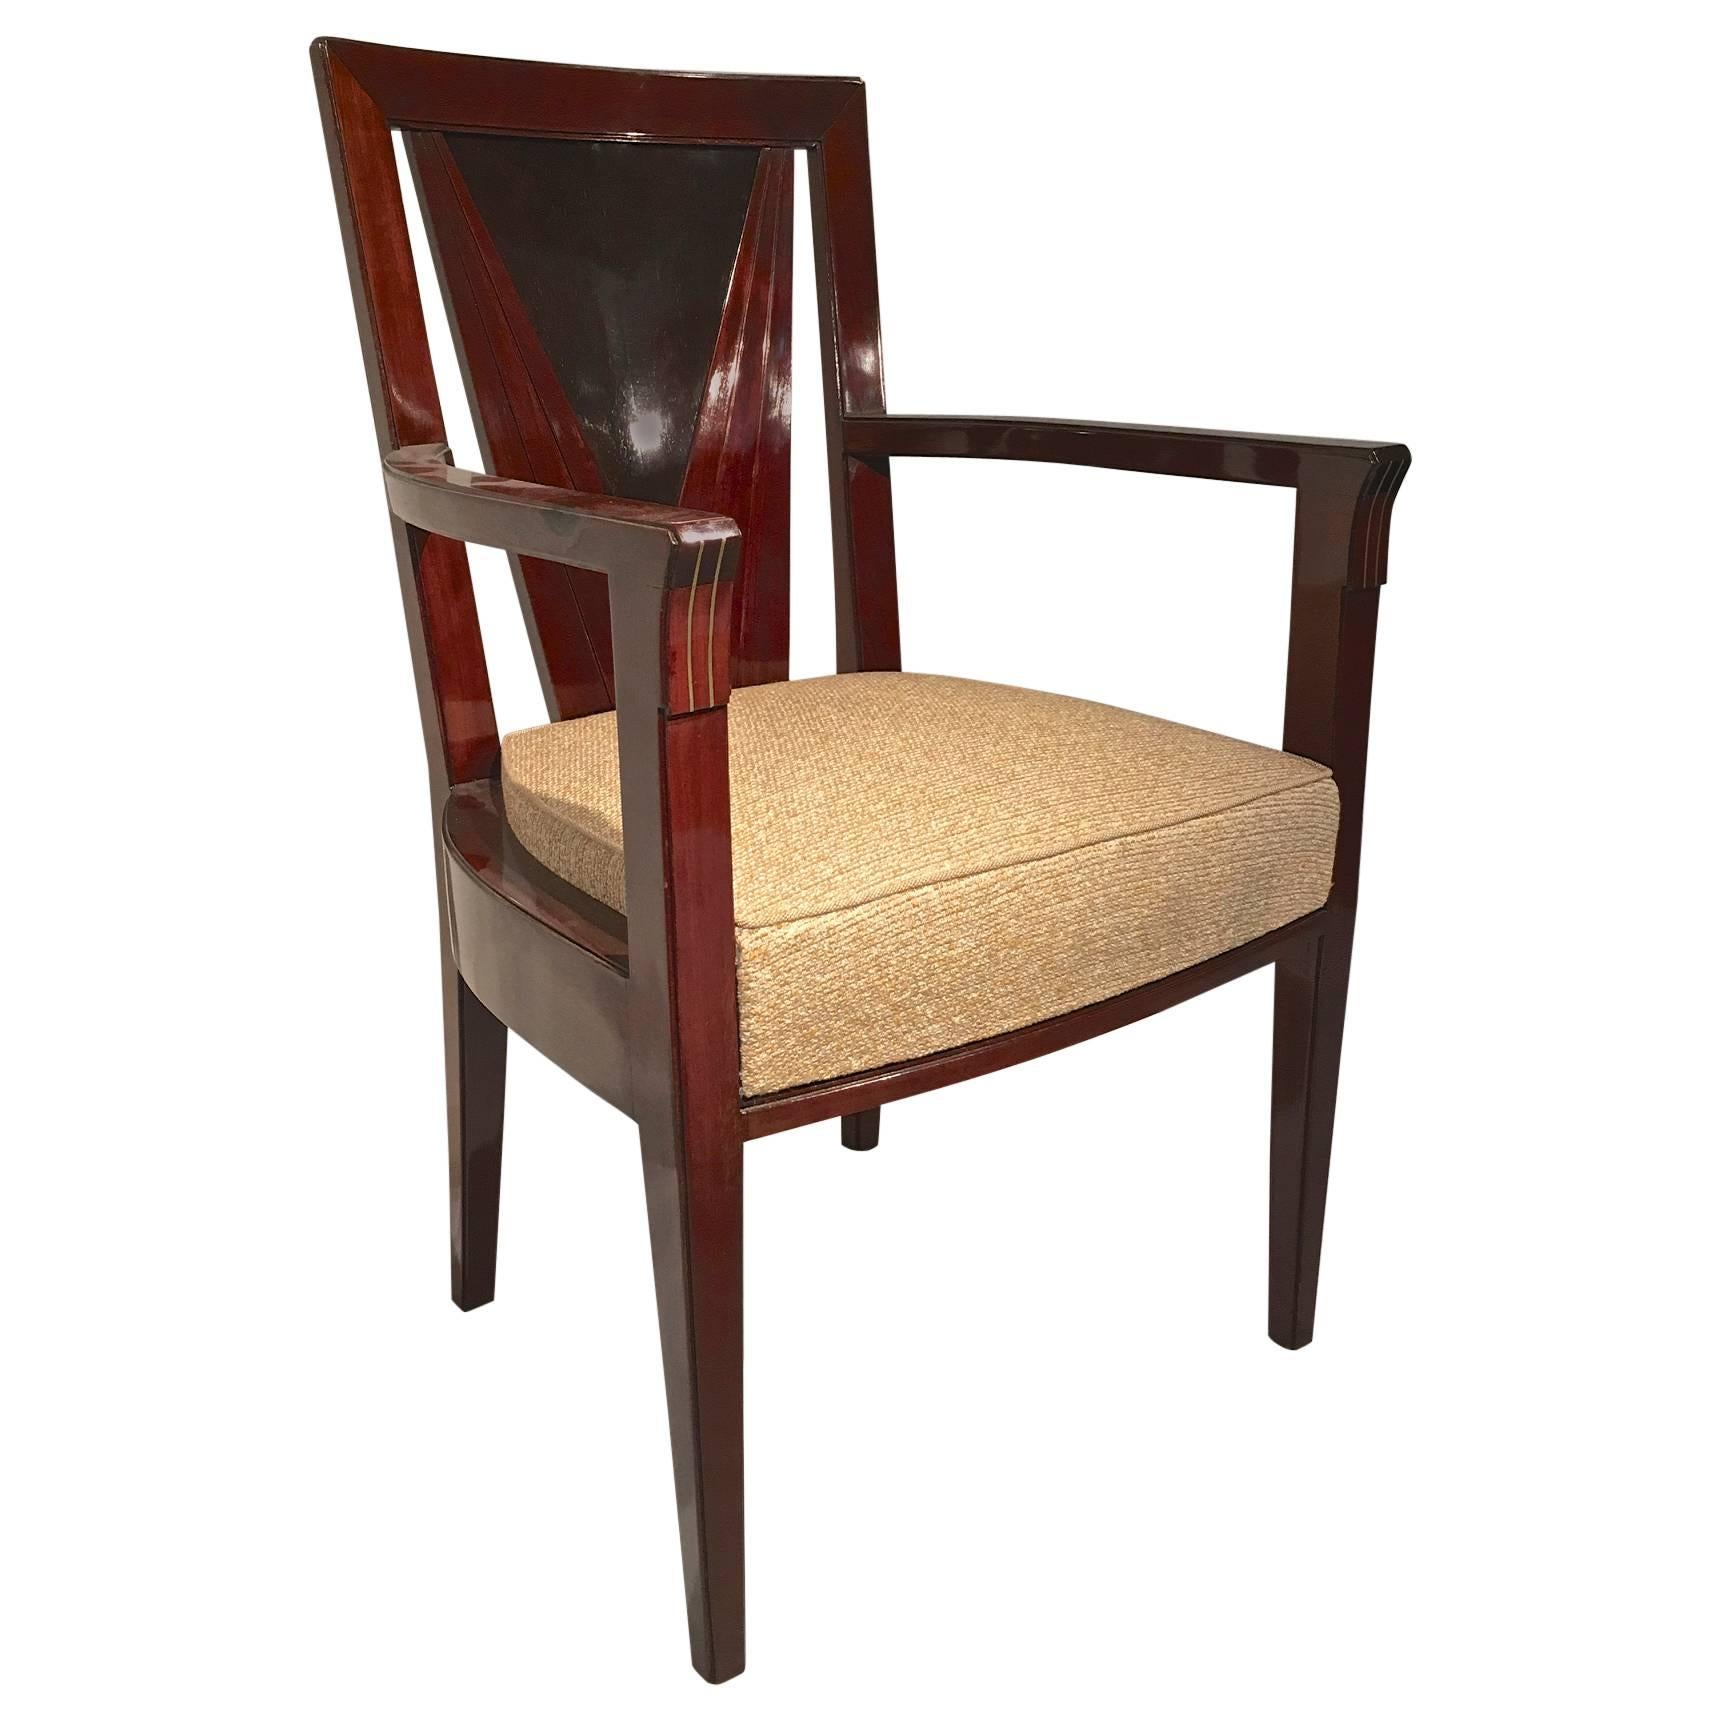 Maison Dominique Rarest Stamped Desk Chair in Mahogany and Makassar For Sale